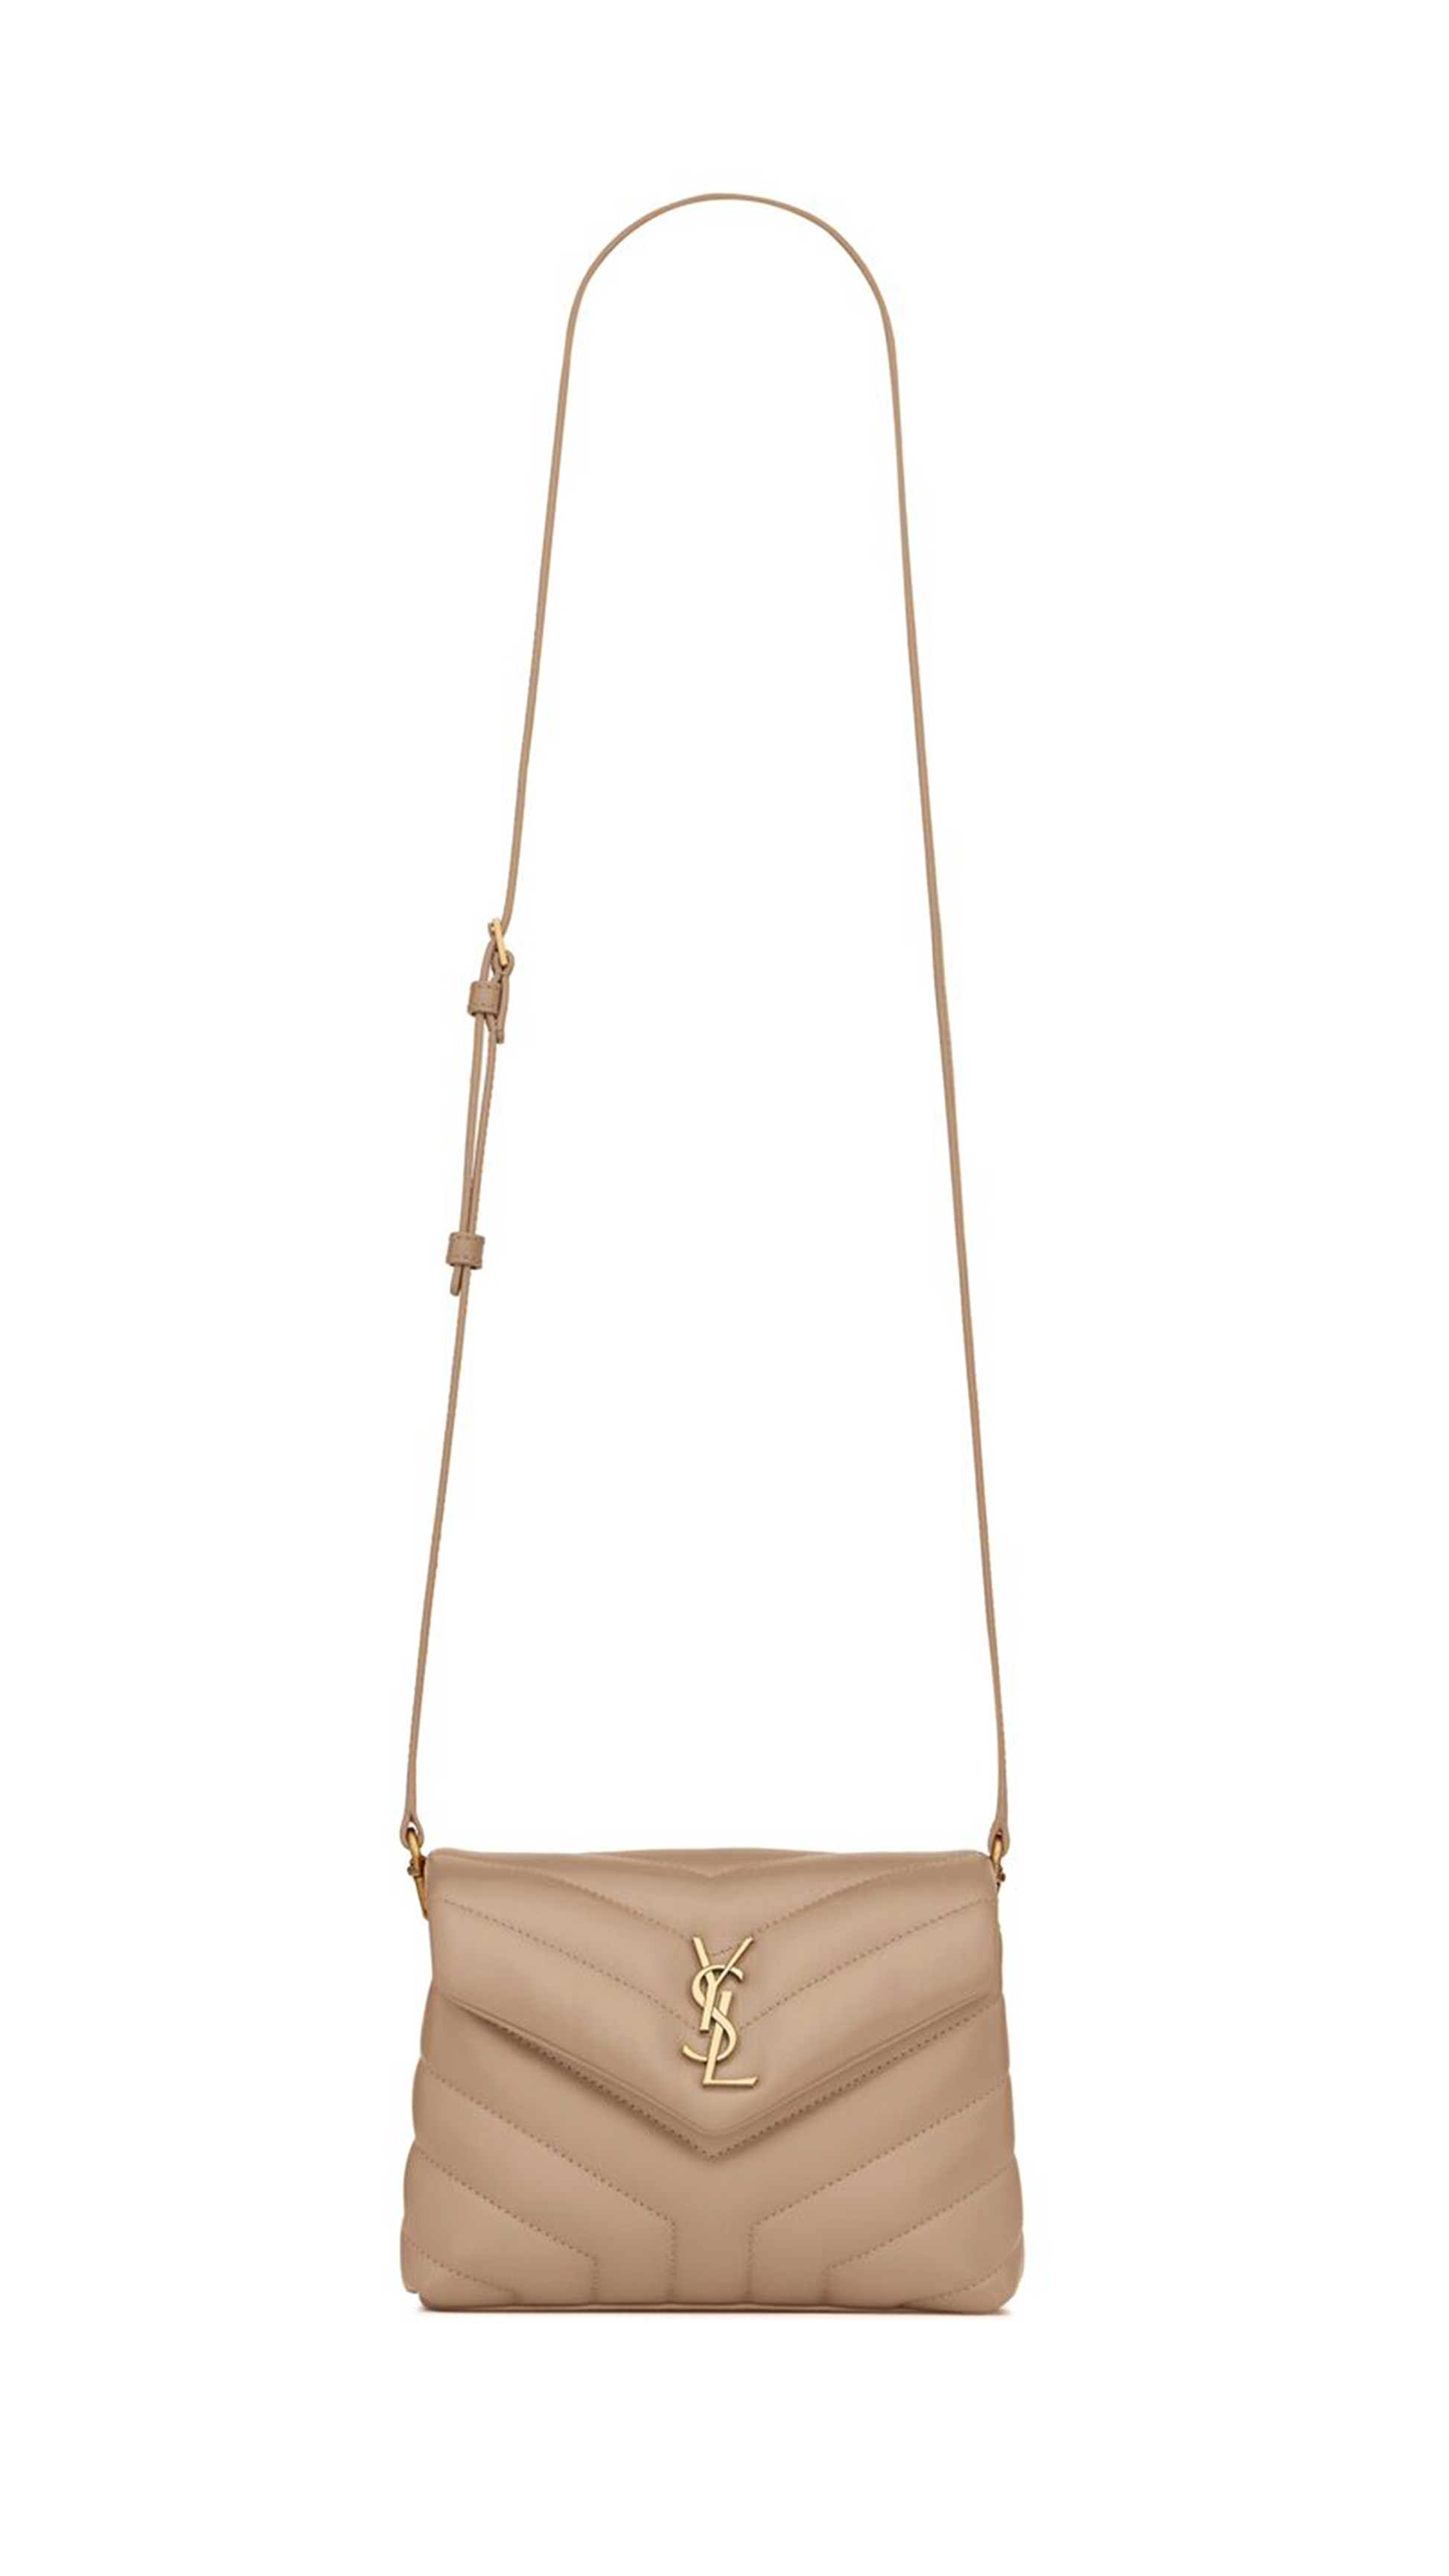 White Loulou Toy Strap Bag - Mini, Quilted Y Leather, YSL